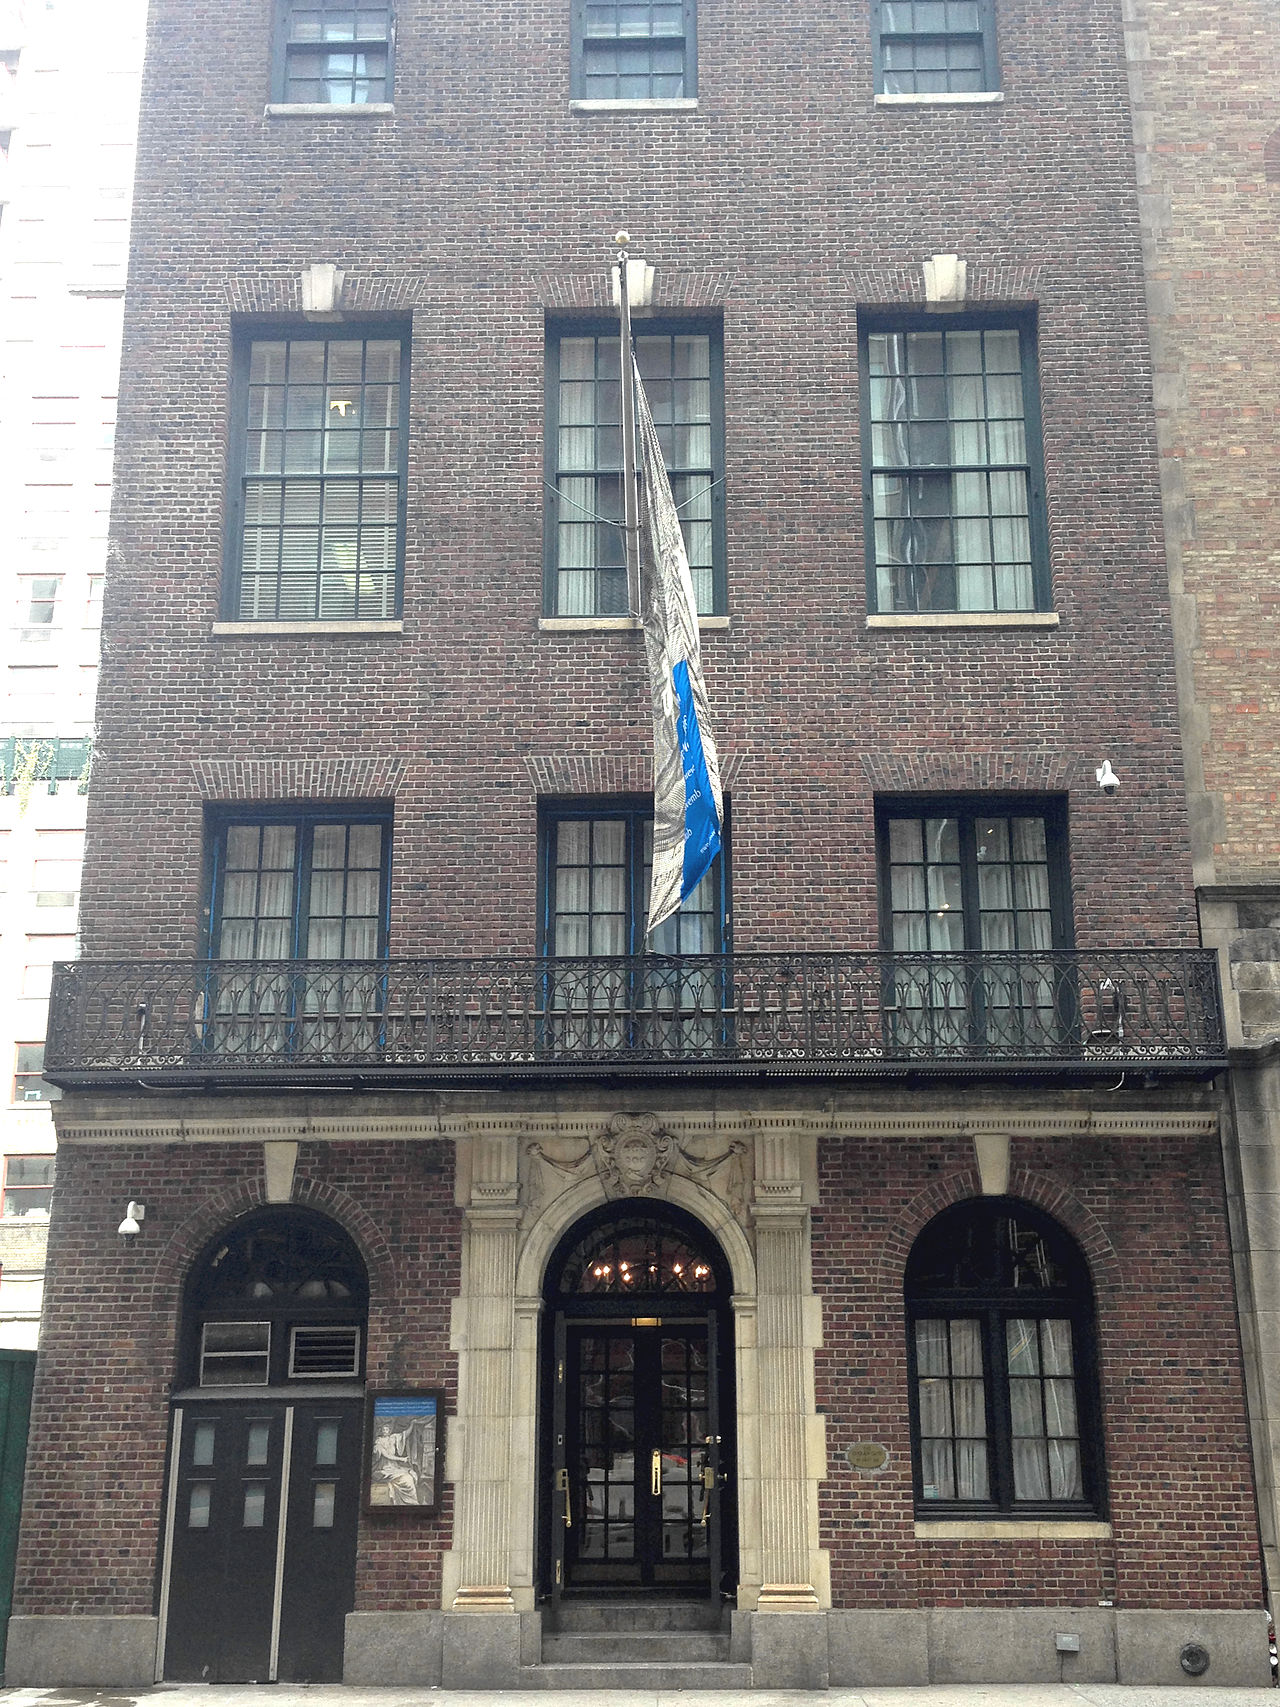 The Grolier Club's home at 47 East 60th Street